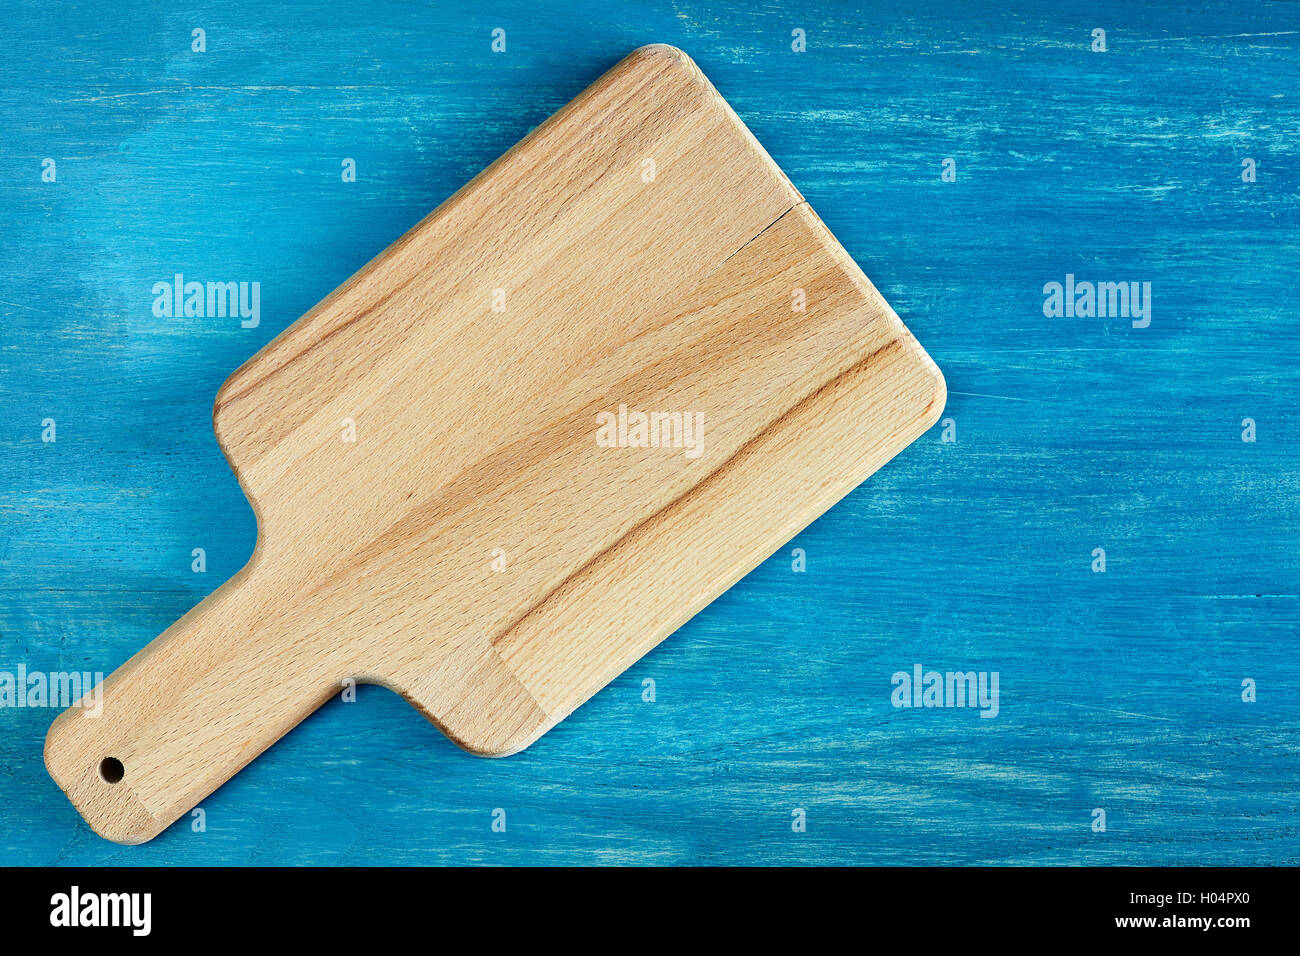 Empty wooden cutting board on rustic blue table, background with space for text, top view. Stock Photo